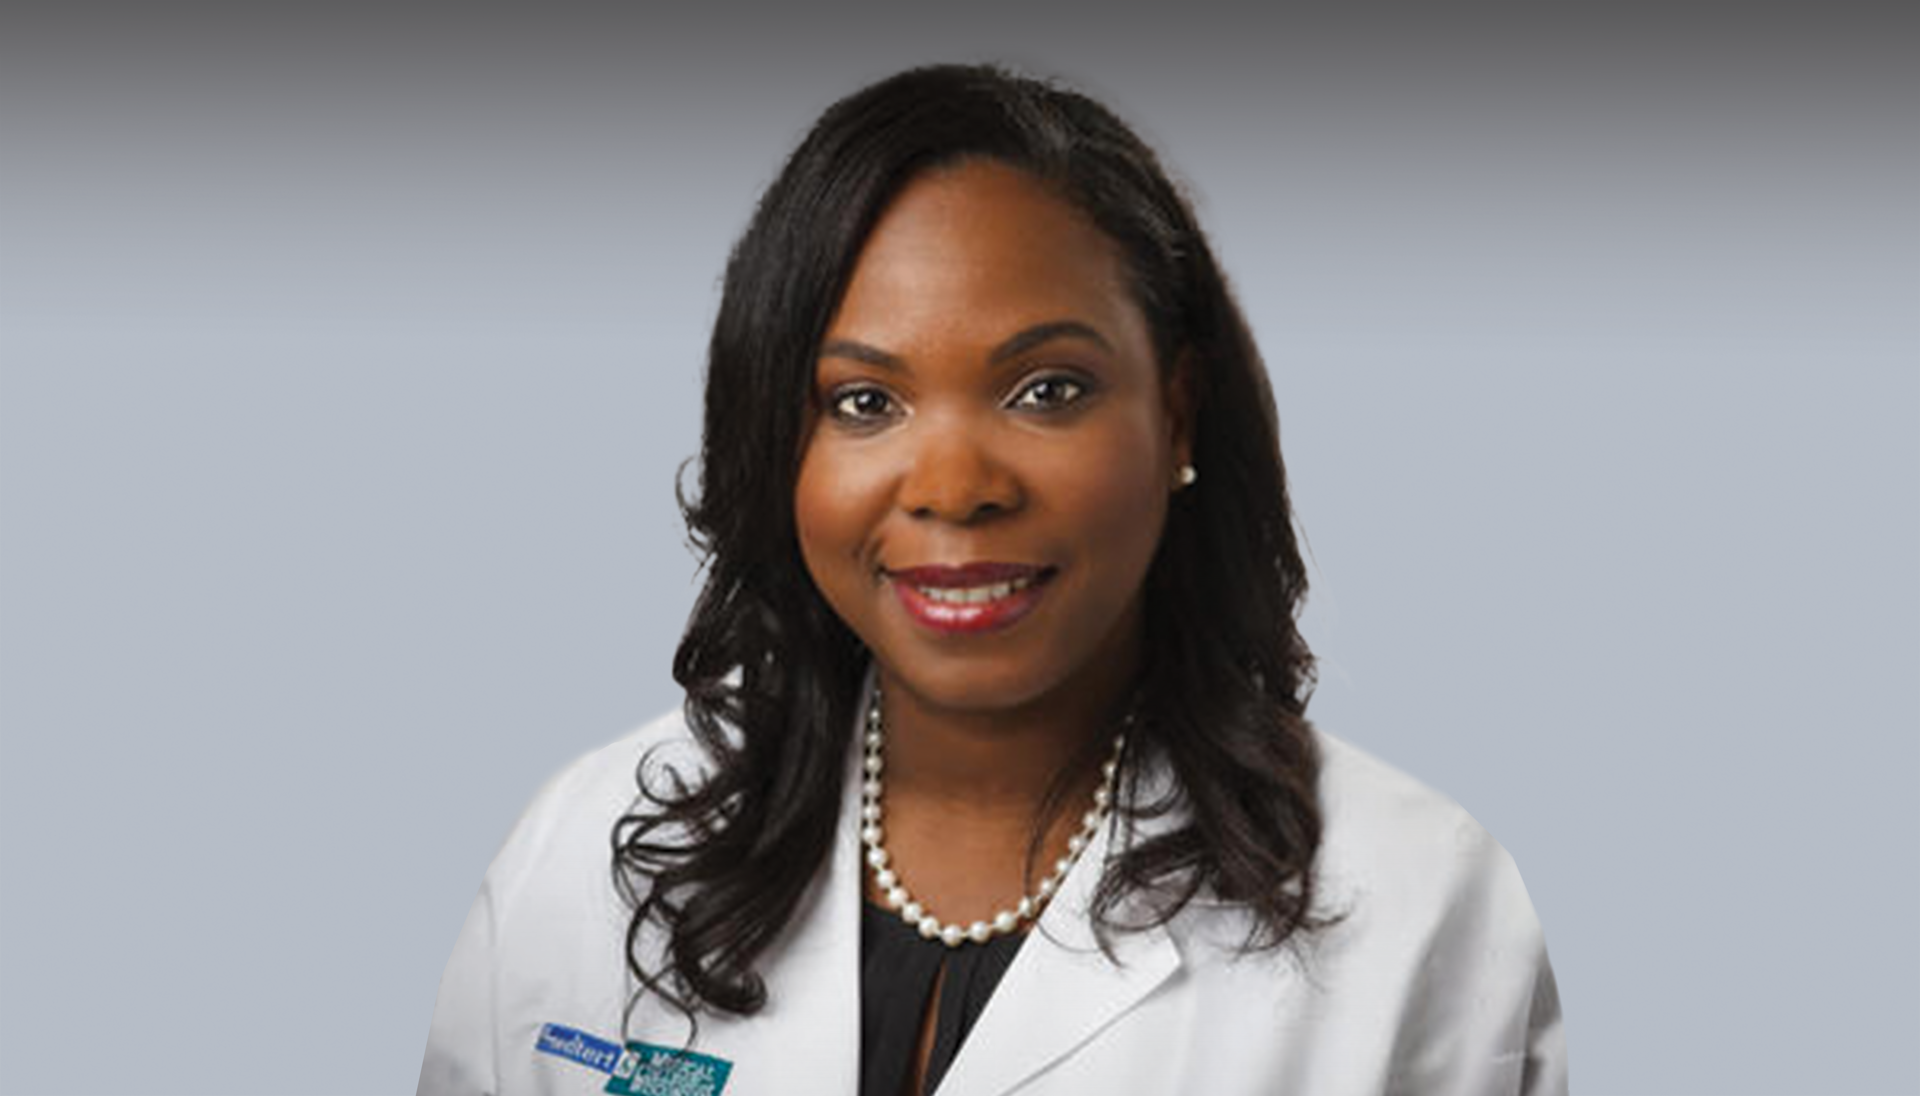 Dr. Callisia Clarke Will Be Appointed to US Cancer Advisory Board